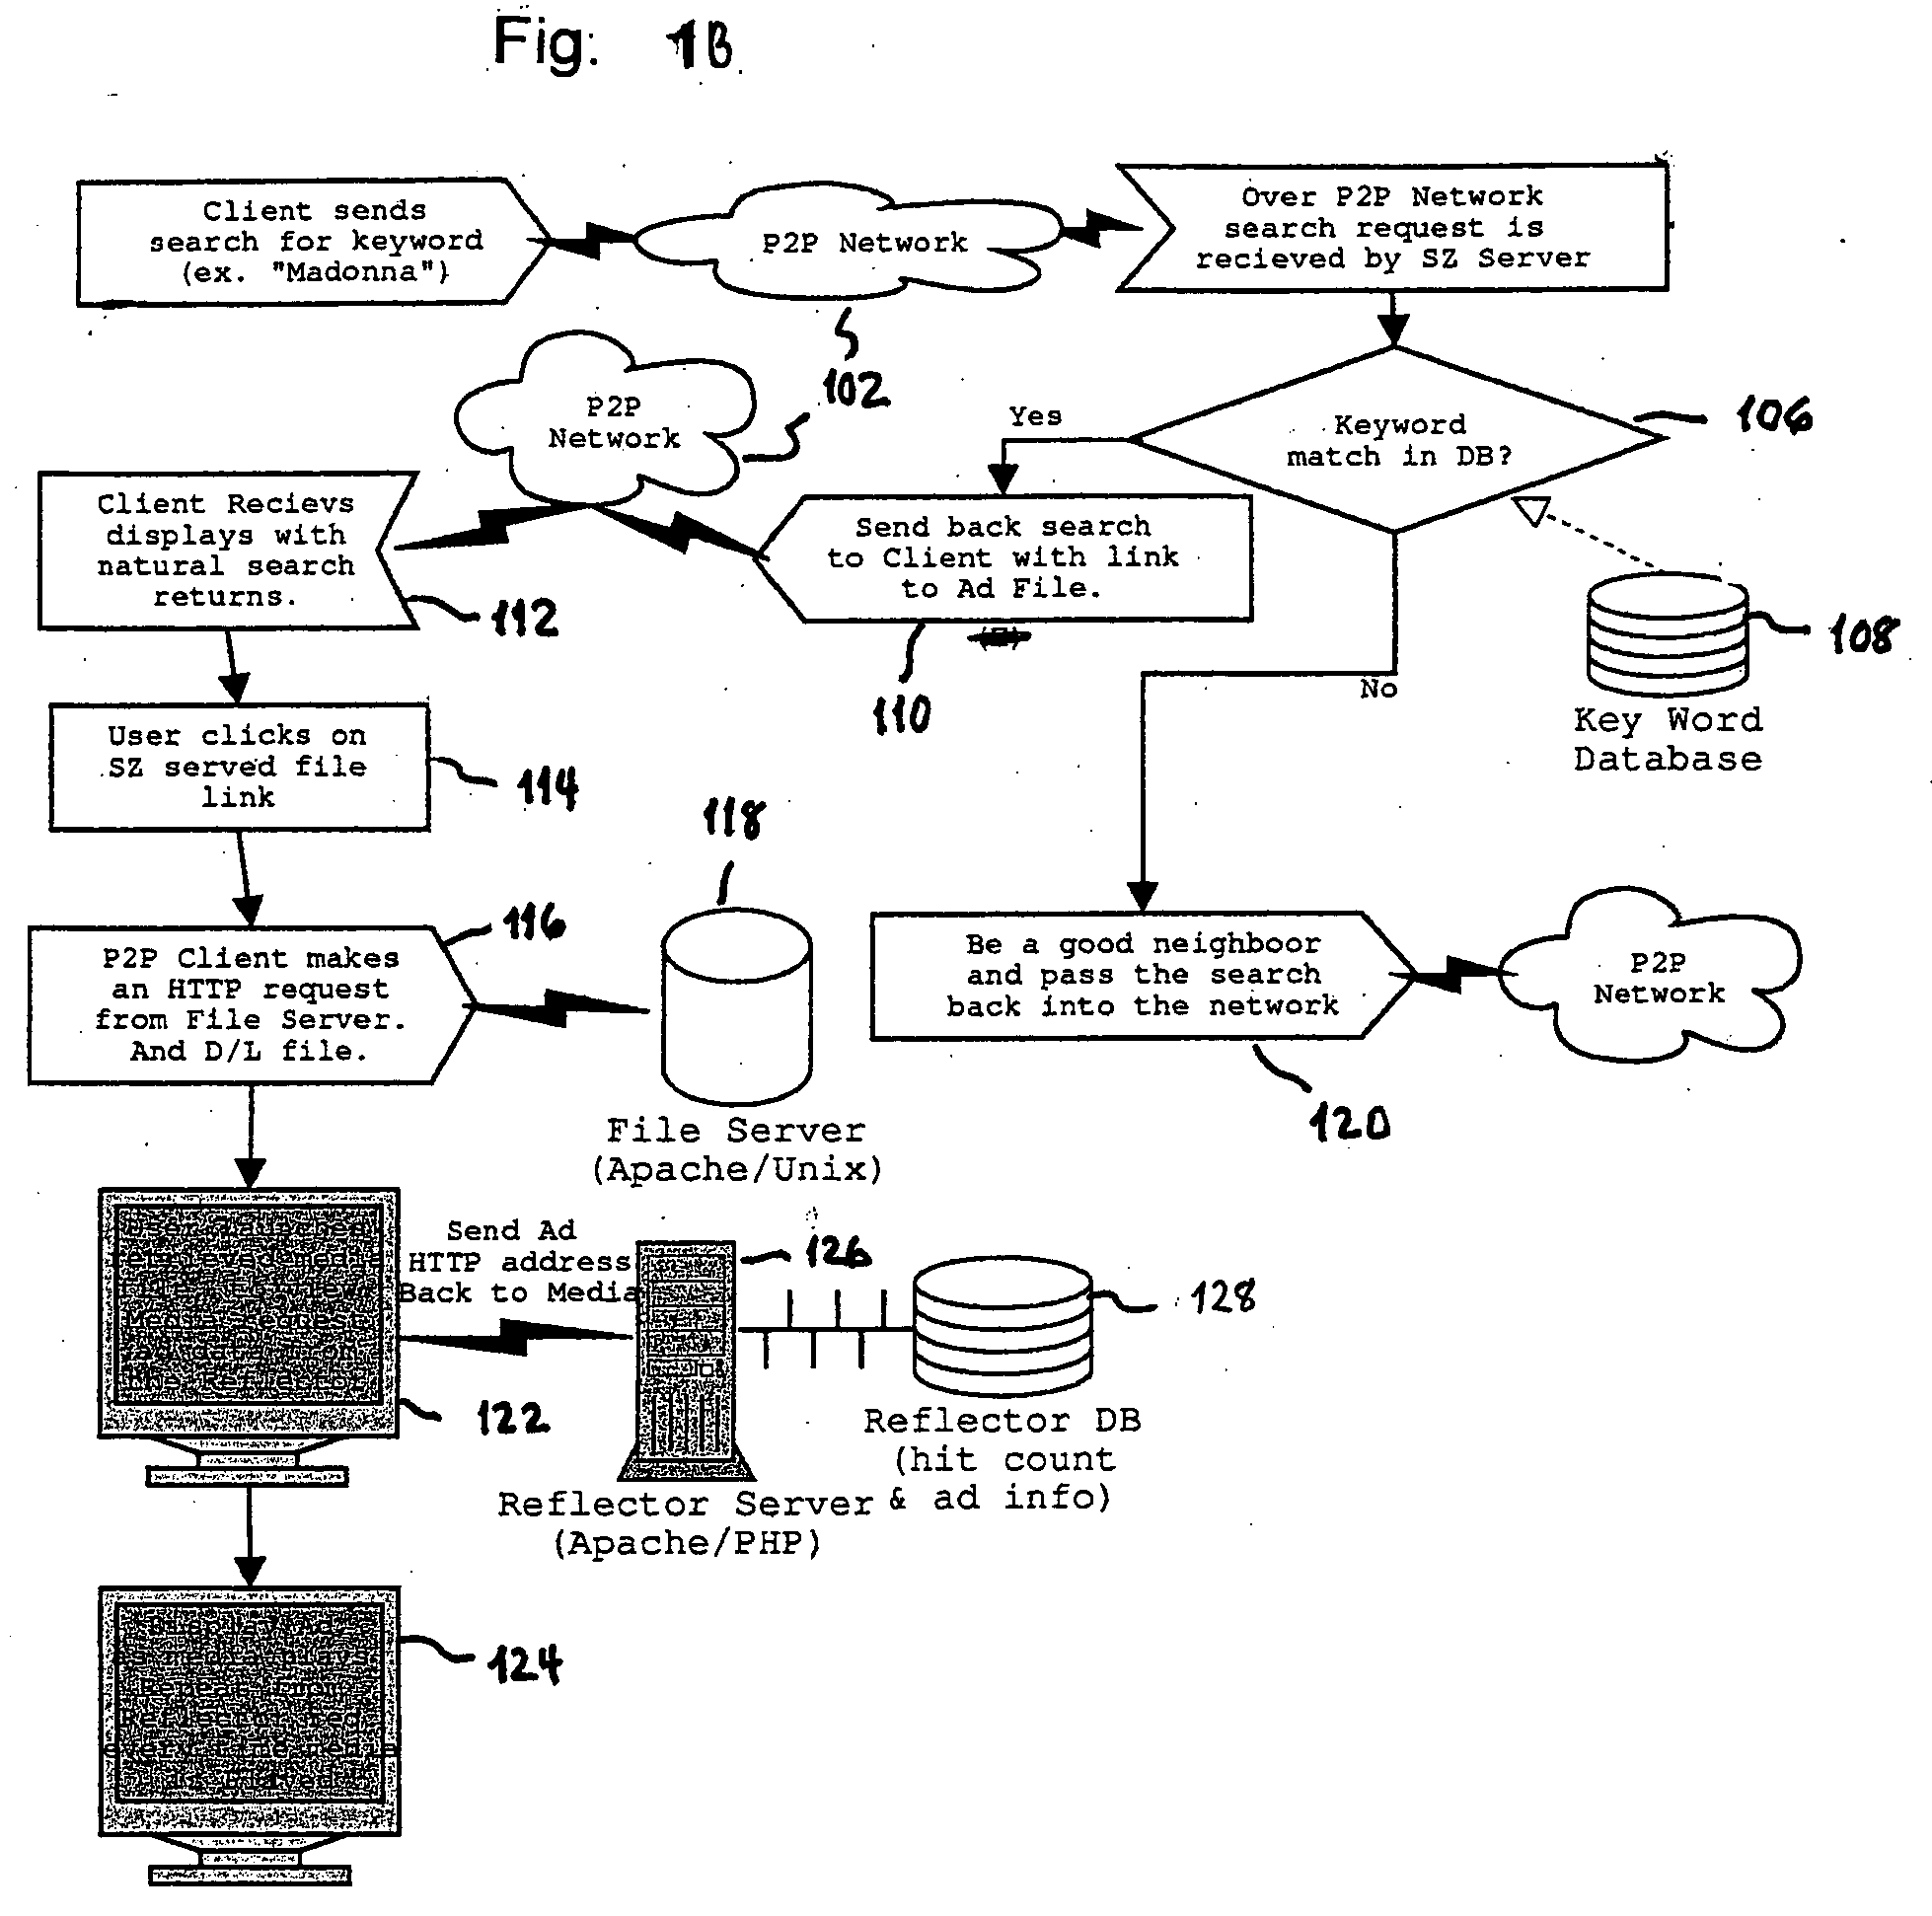 System and methods for direct targeted media advertising over peer-to-peer networks